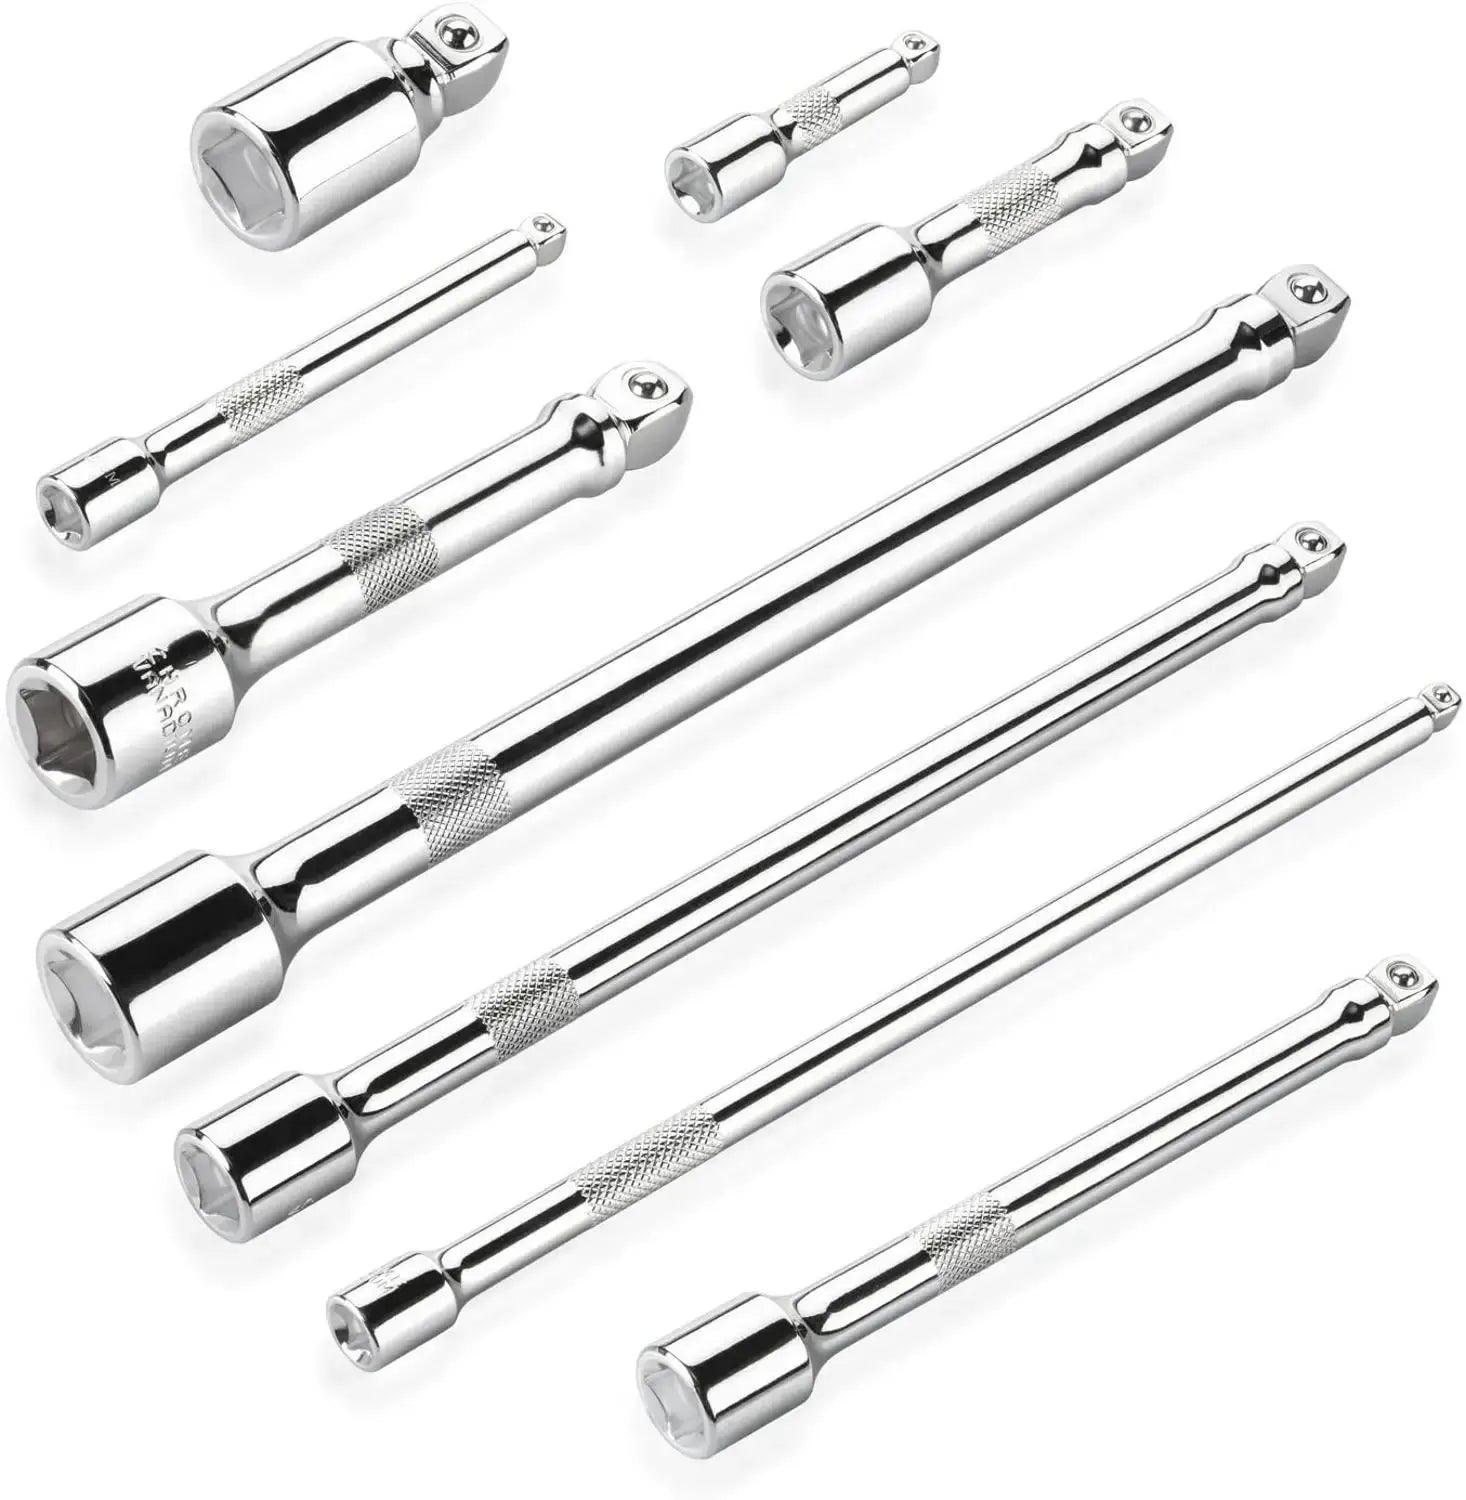 Wobble Extension Bar Set, 9 Piece Combination | 1/4-Inch, 3/8-Inch, 1/2-Inch Drive | Cr-V Steel, Socket Extension Set BrothersCarCare